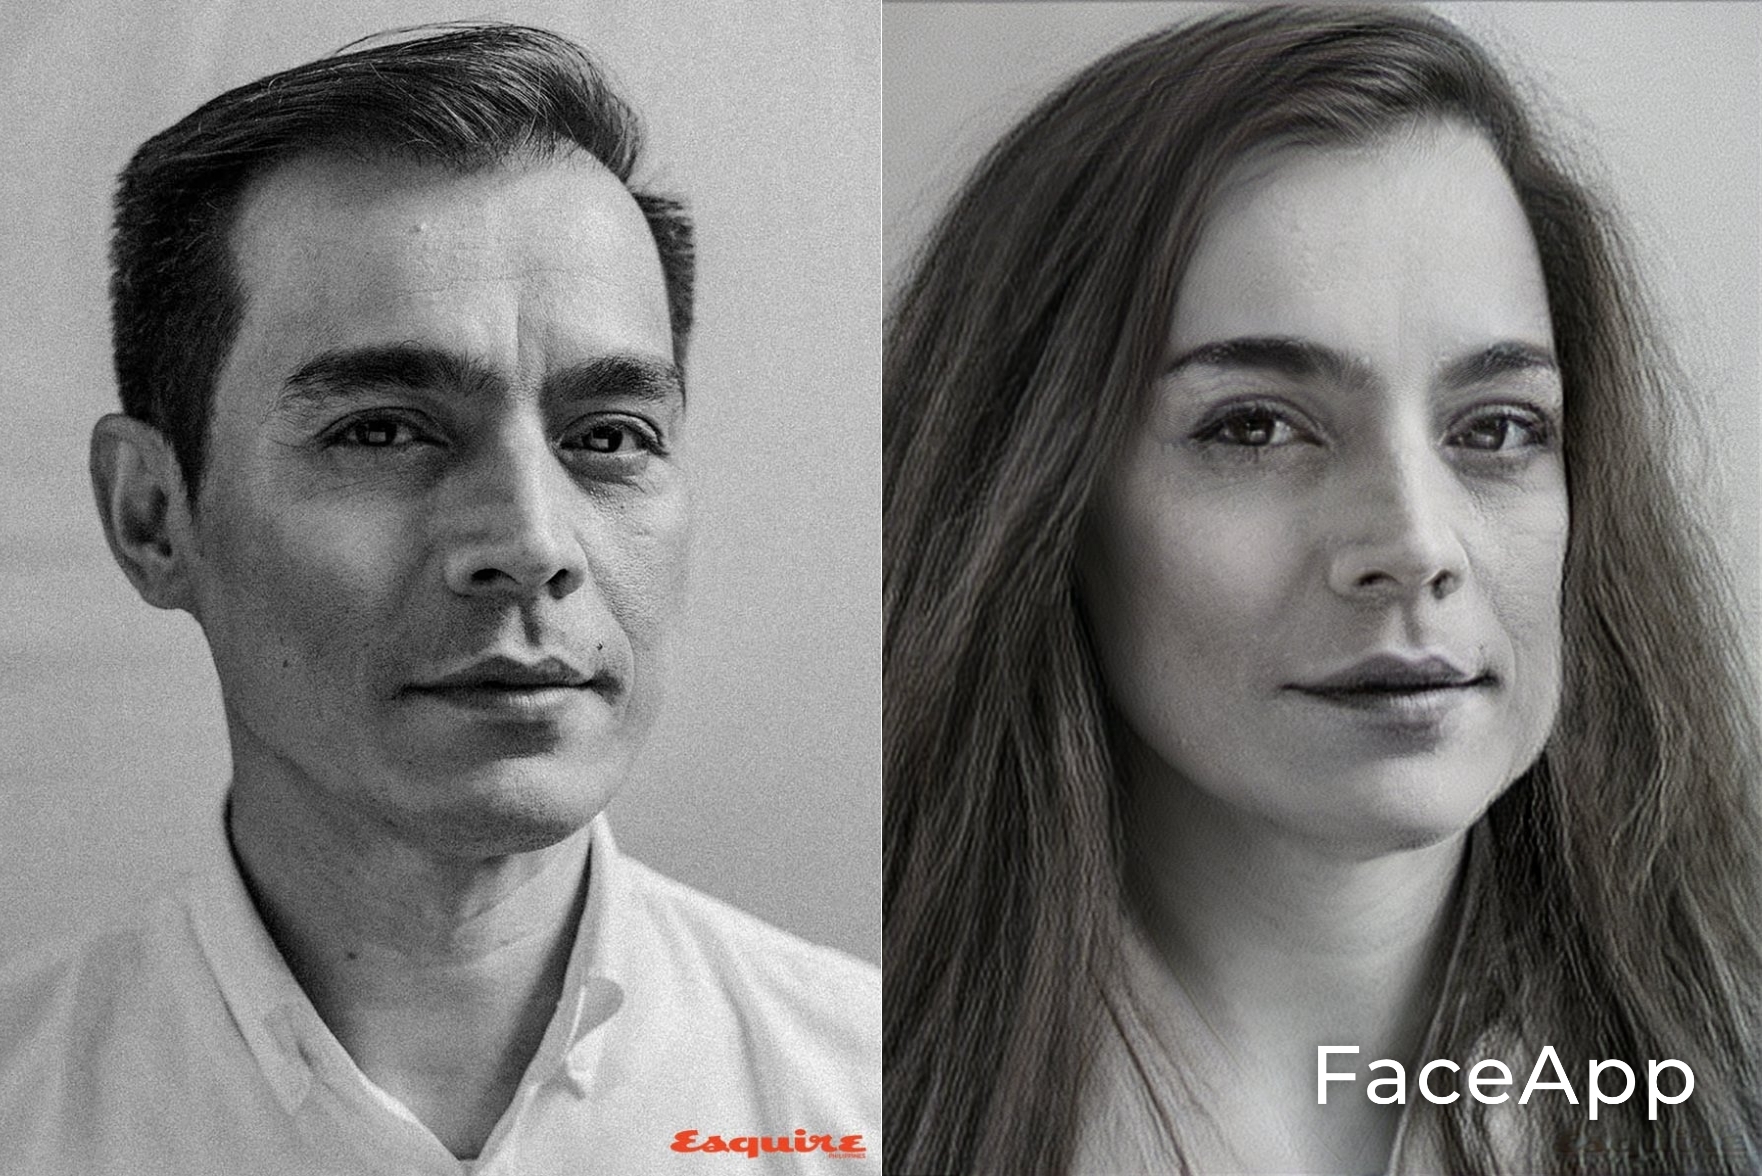 So, We Tried Faceapp on Filipino Politicians, And the Results Are ...